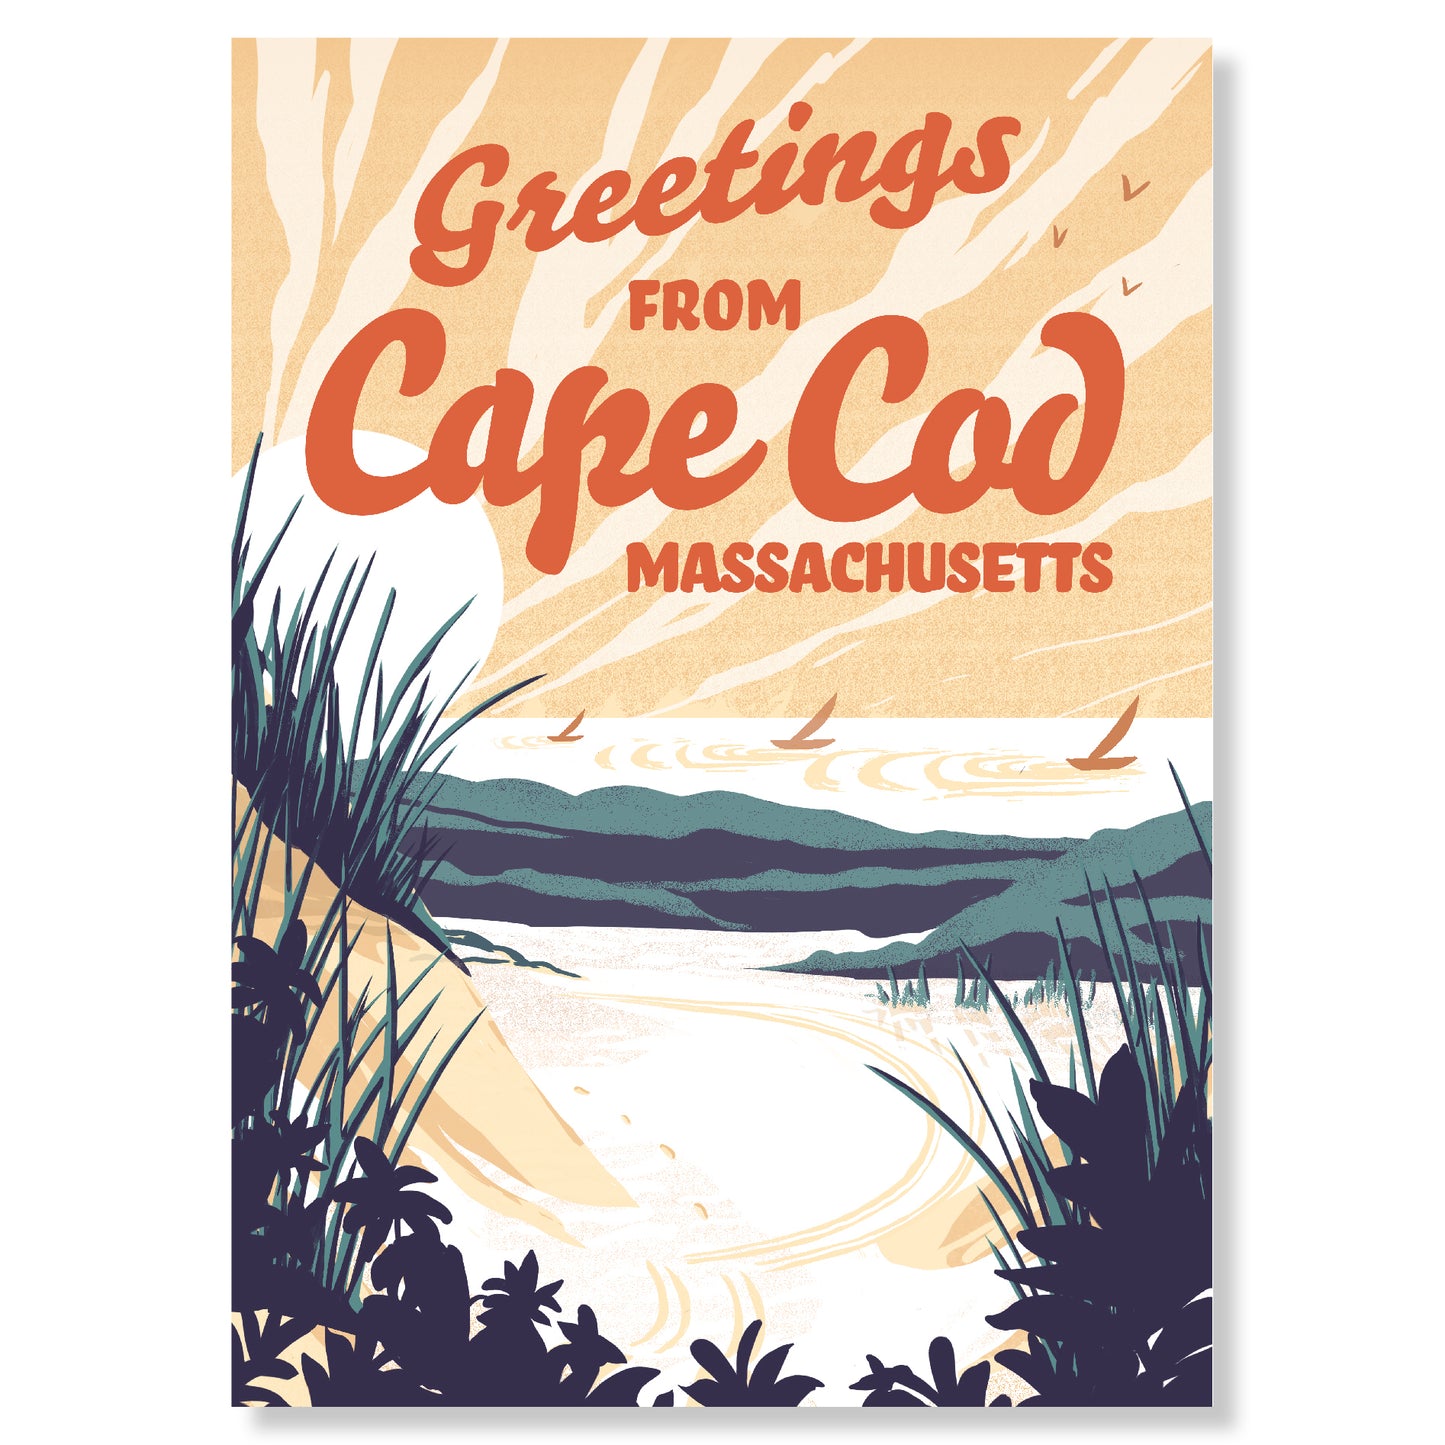 "Greetings from Cape Cod" Postcard